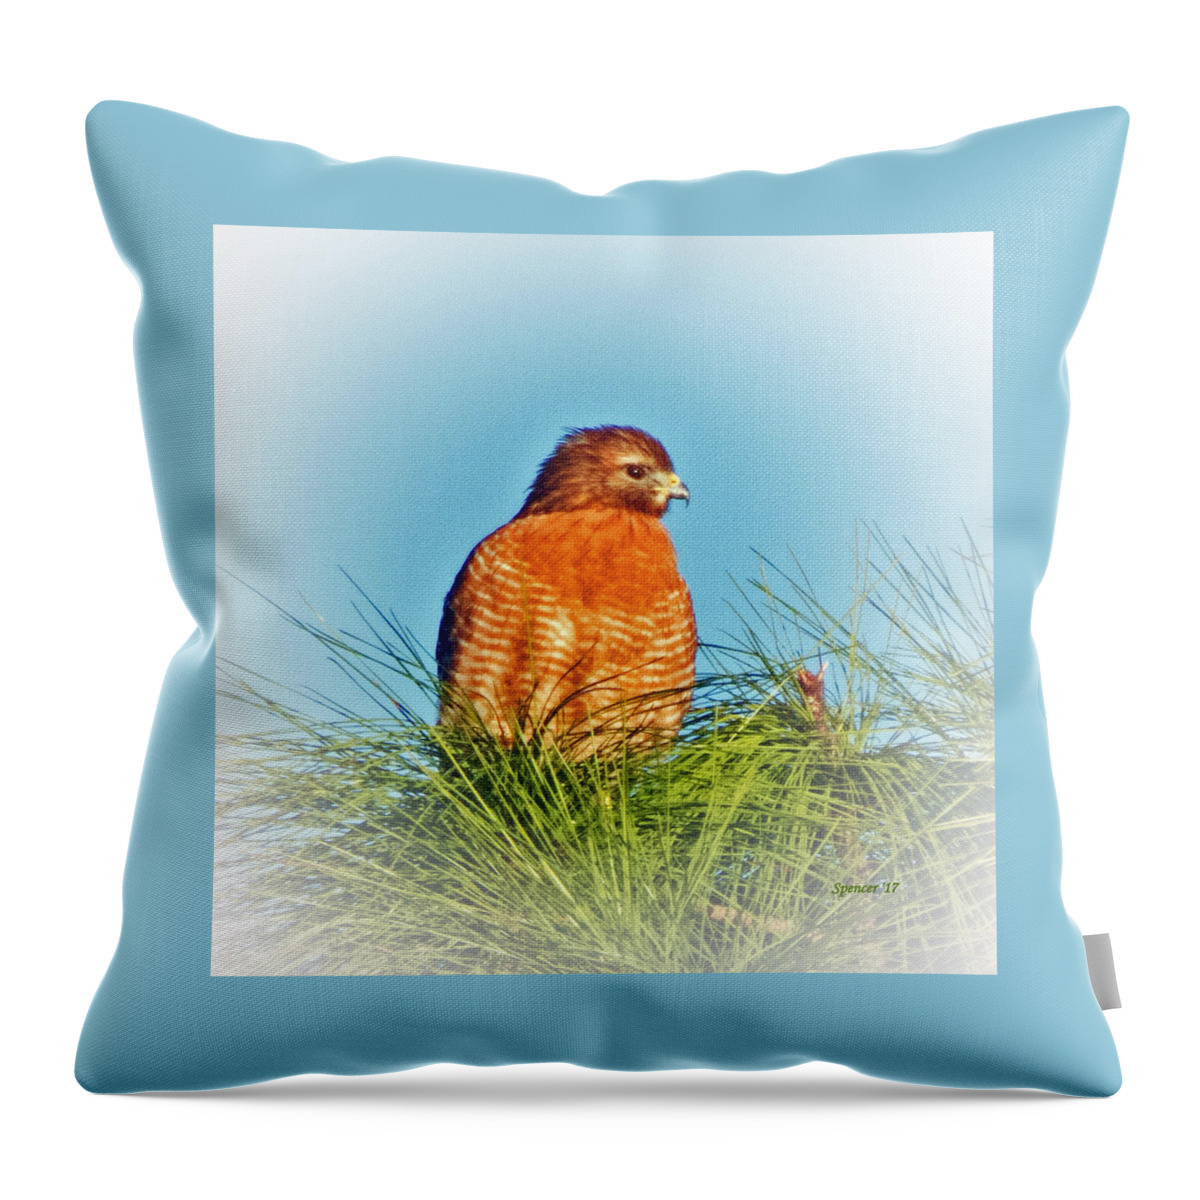 Wildlife Throw Pillow featuring the photograph Hawk High by T Guy Spencer